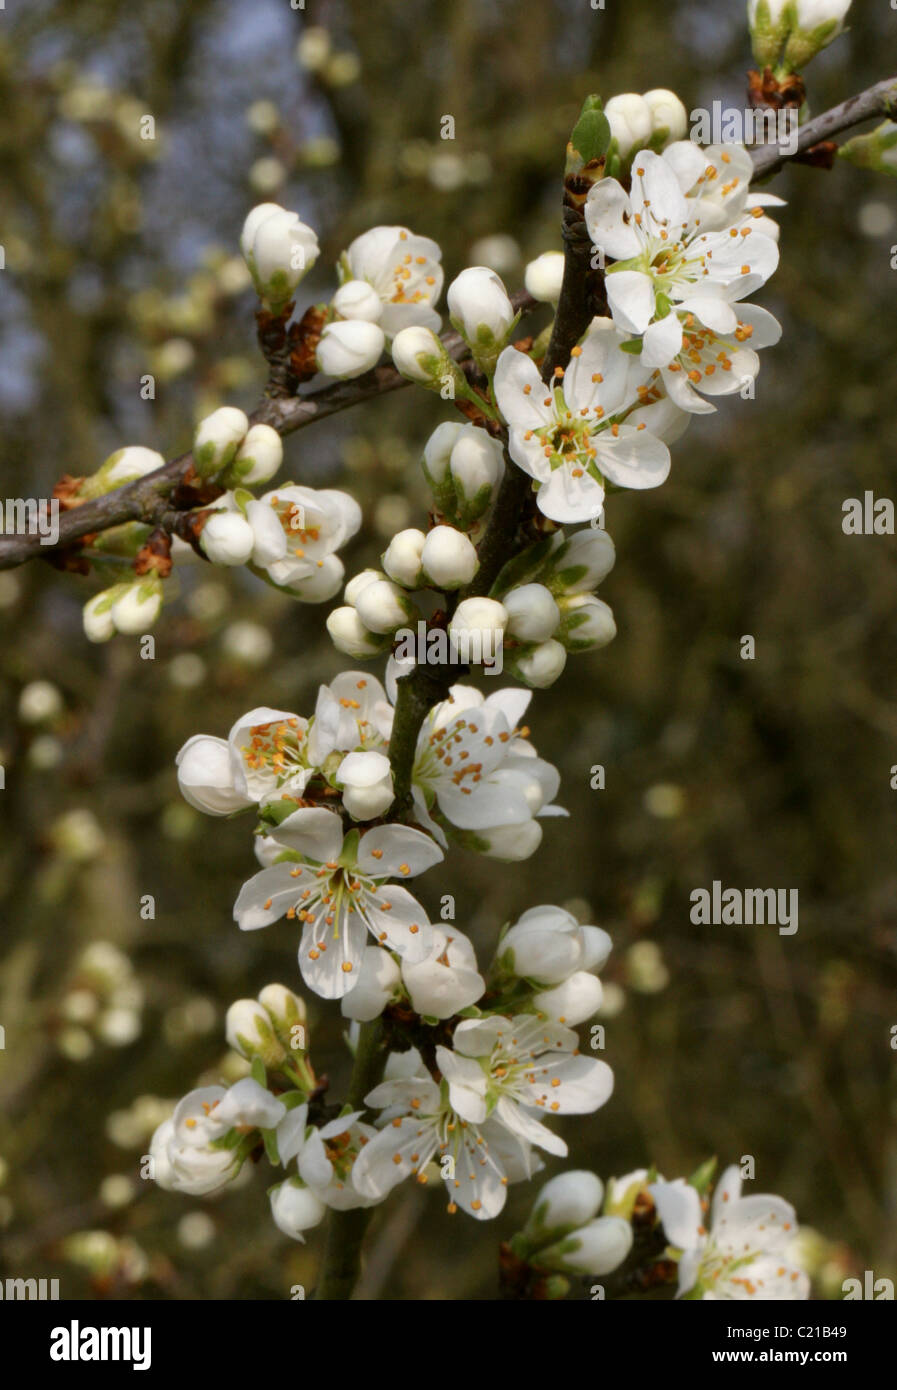 Blackthorn Blossom, Prunus spinosa, Rosaceae, in March, Hertfordshire, UK. Stock Photo